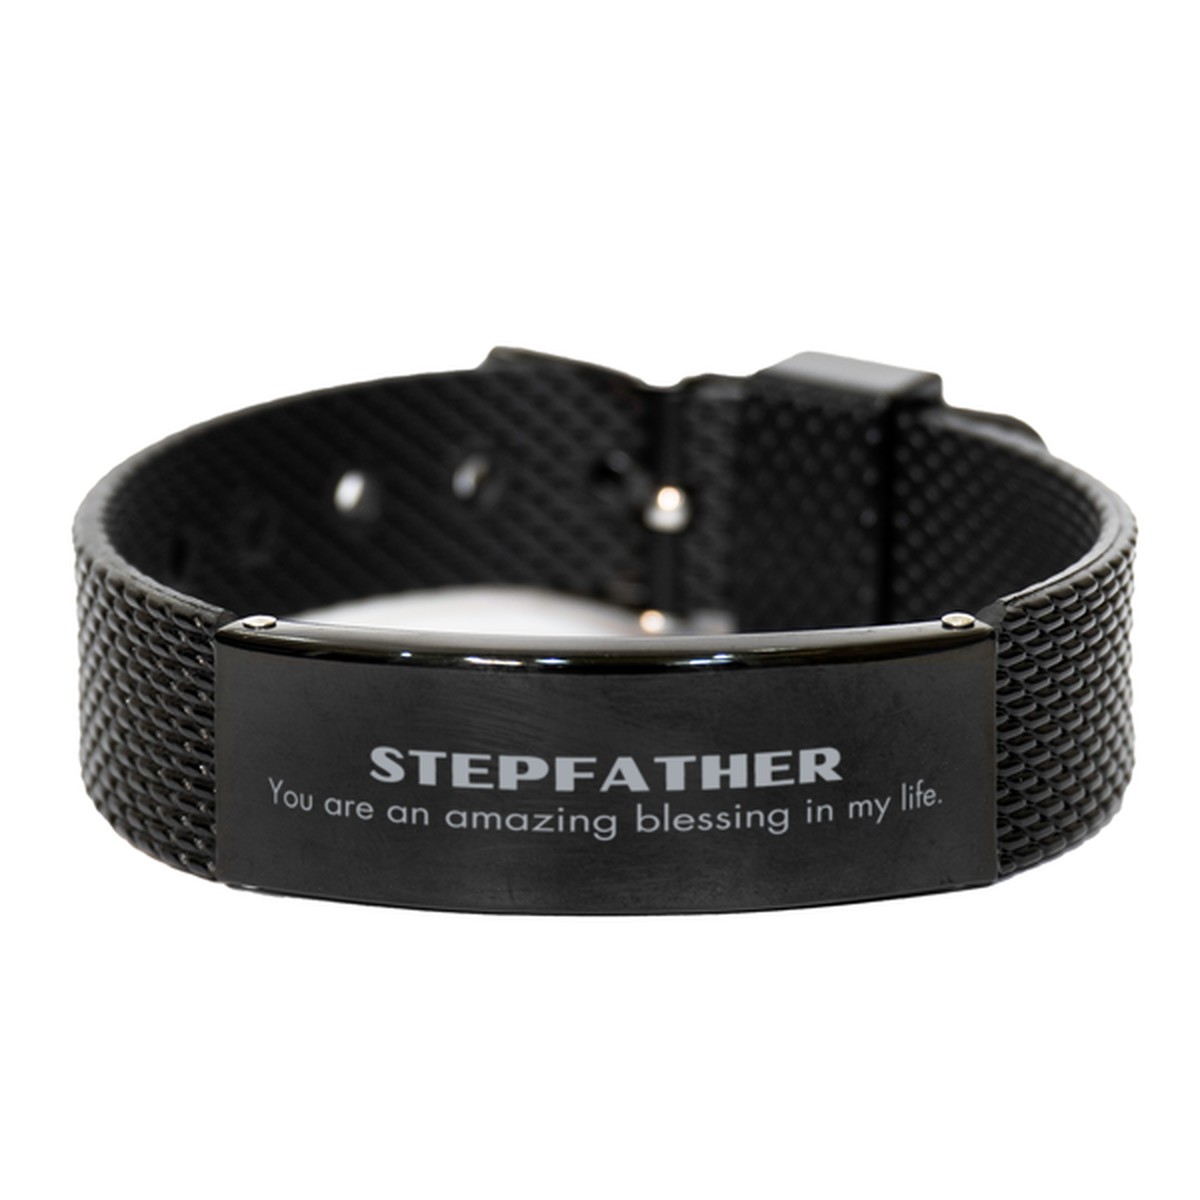 Stepfather Black Shark Mesh Bracelet, You are an amazing blessing in my life, Thank You Gifts For Stepfather, Inspirational Birthday Christmas Unique Gifts For Stepfather